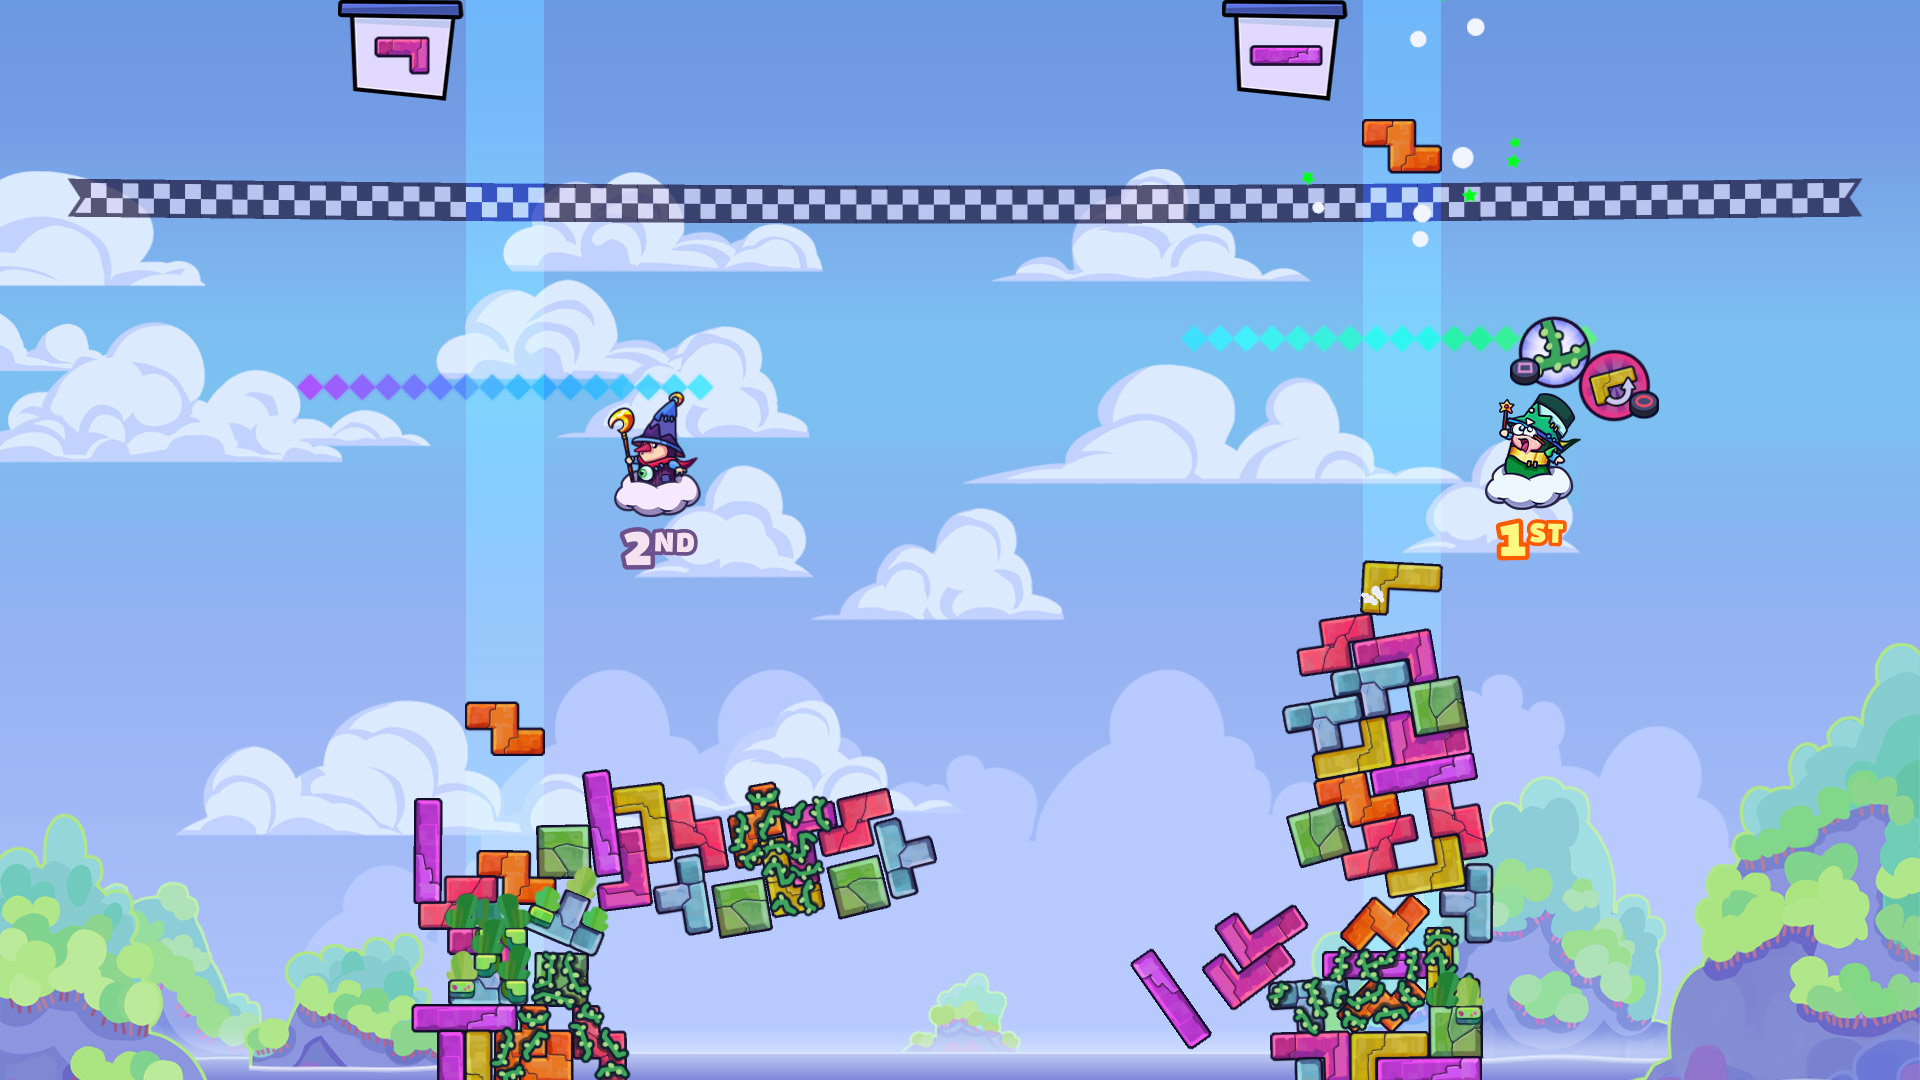 tricky towers pc